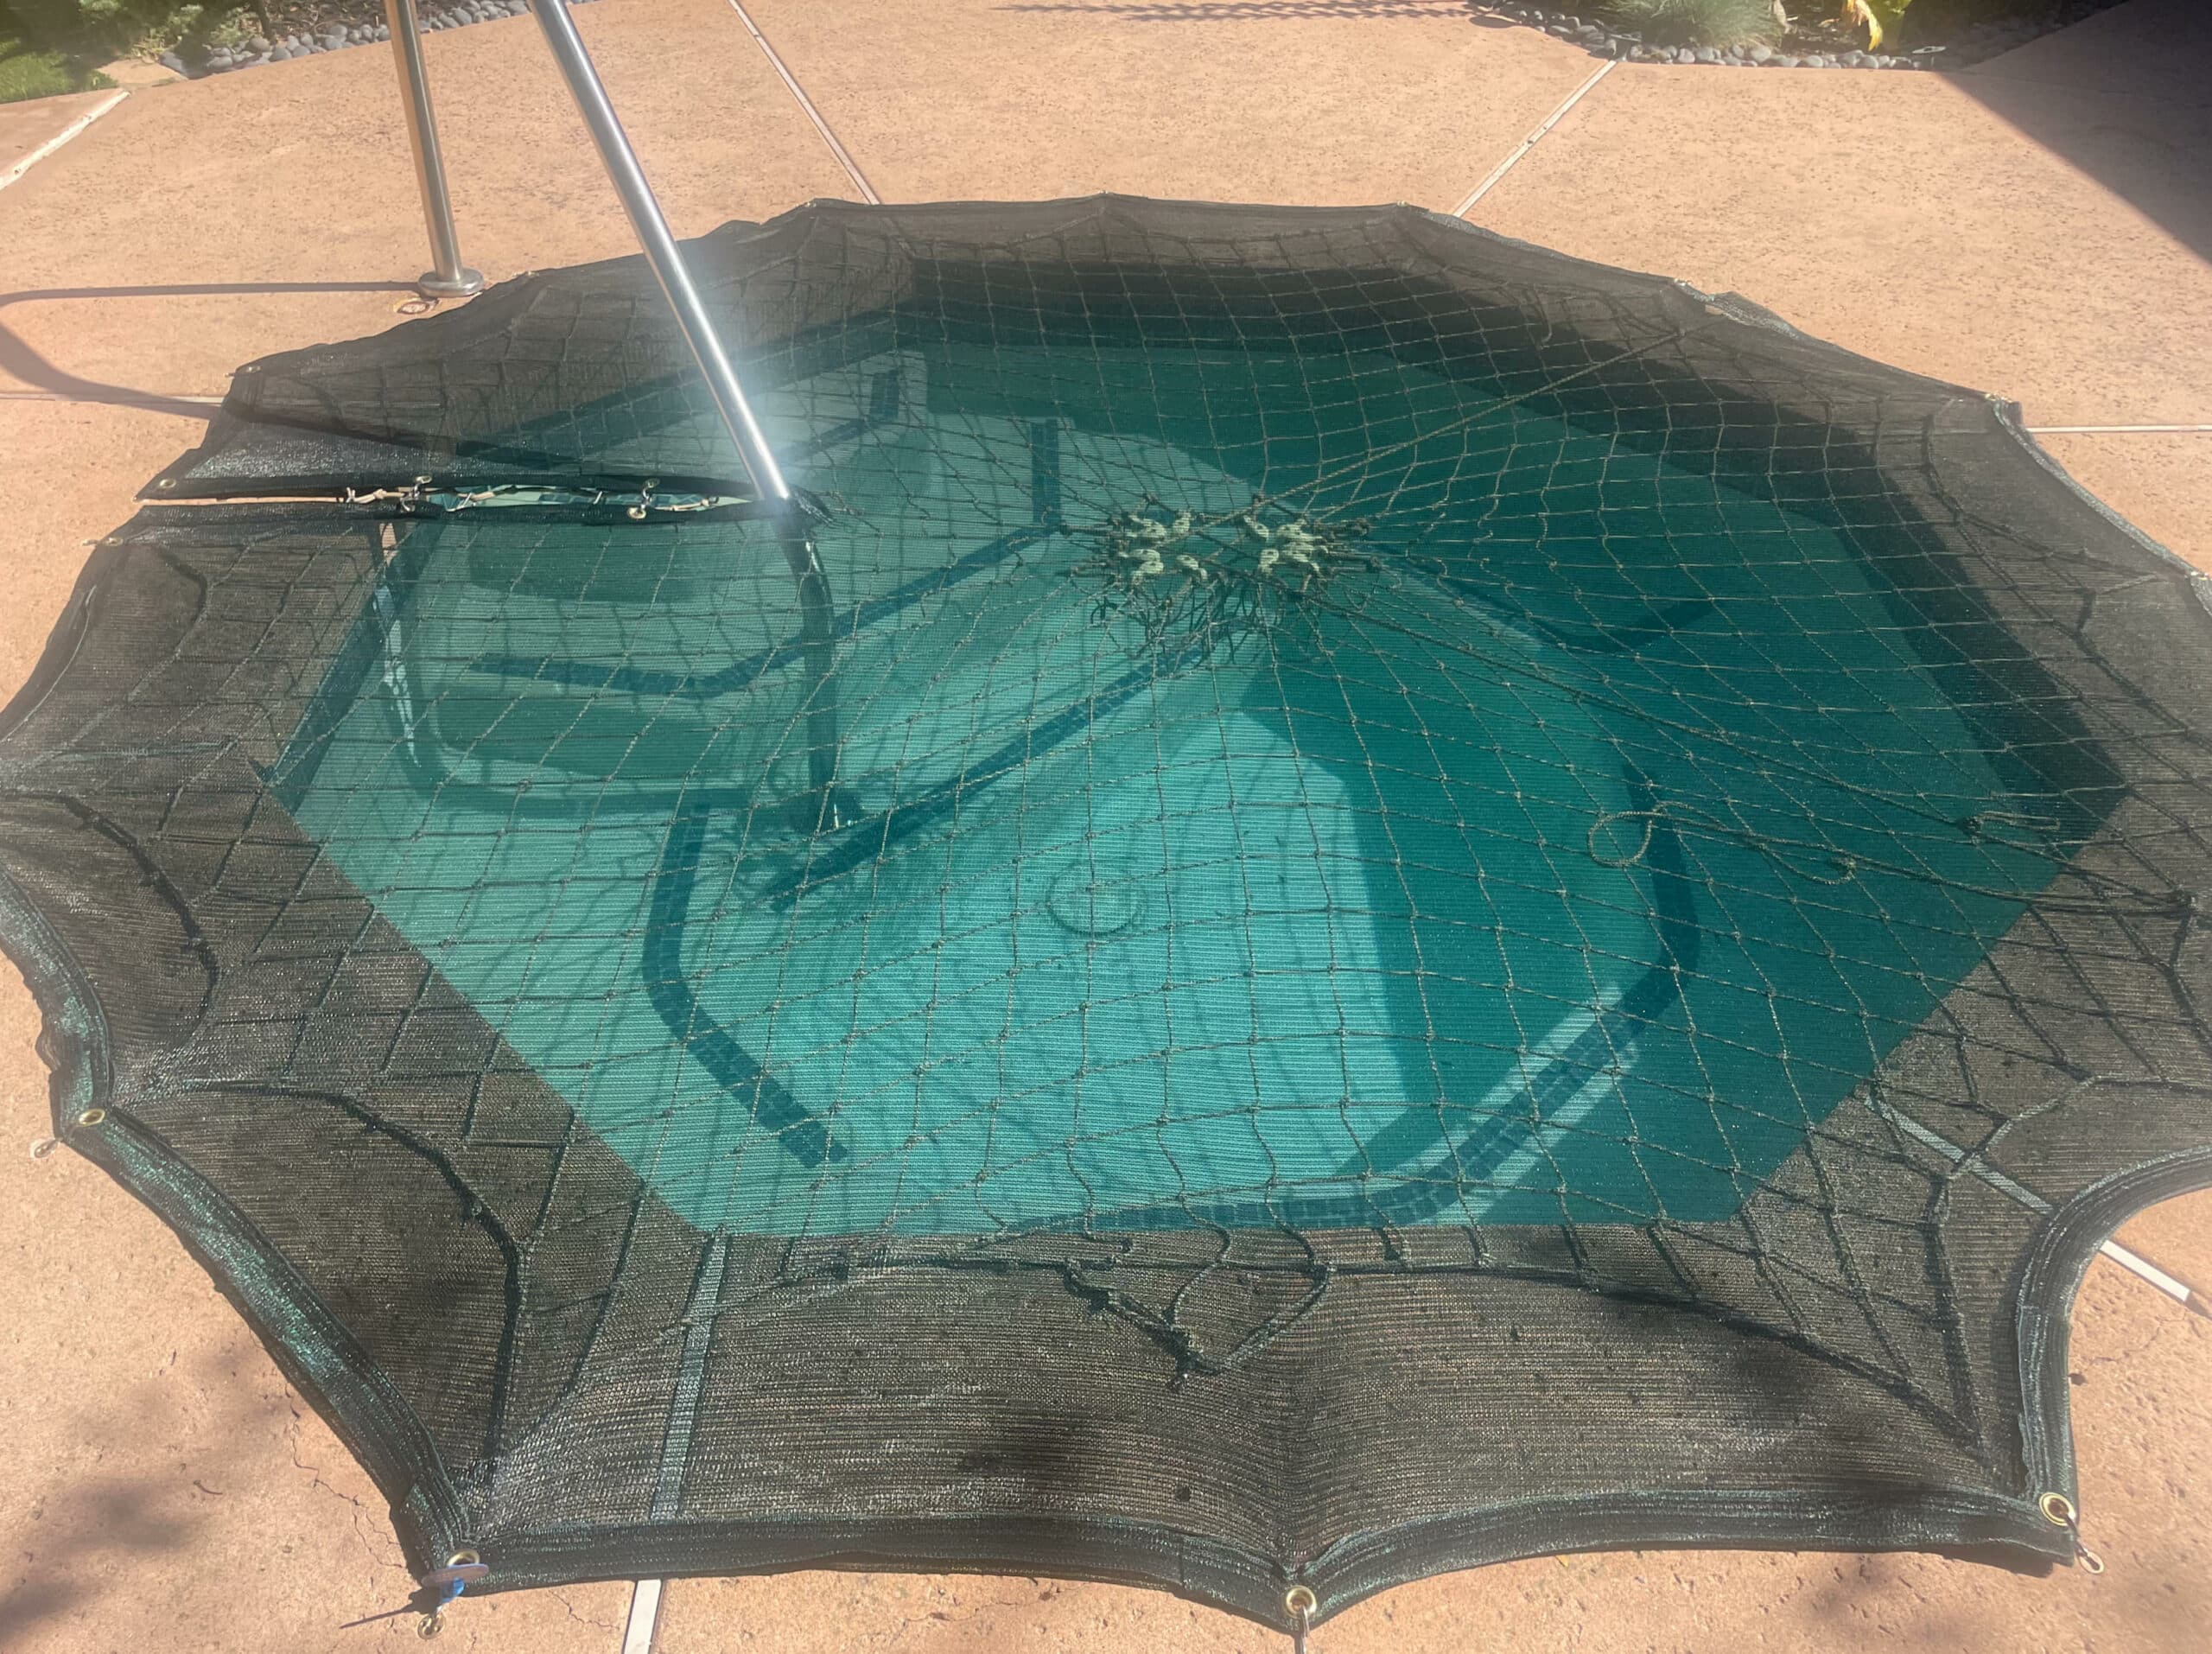 Mesh Pool Covers: The Lightweight Fall Solution